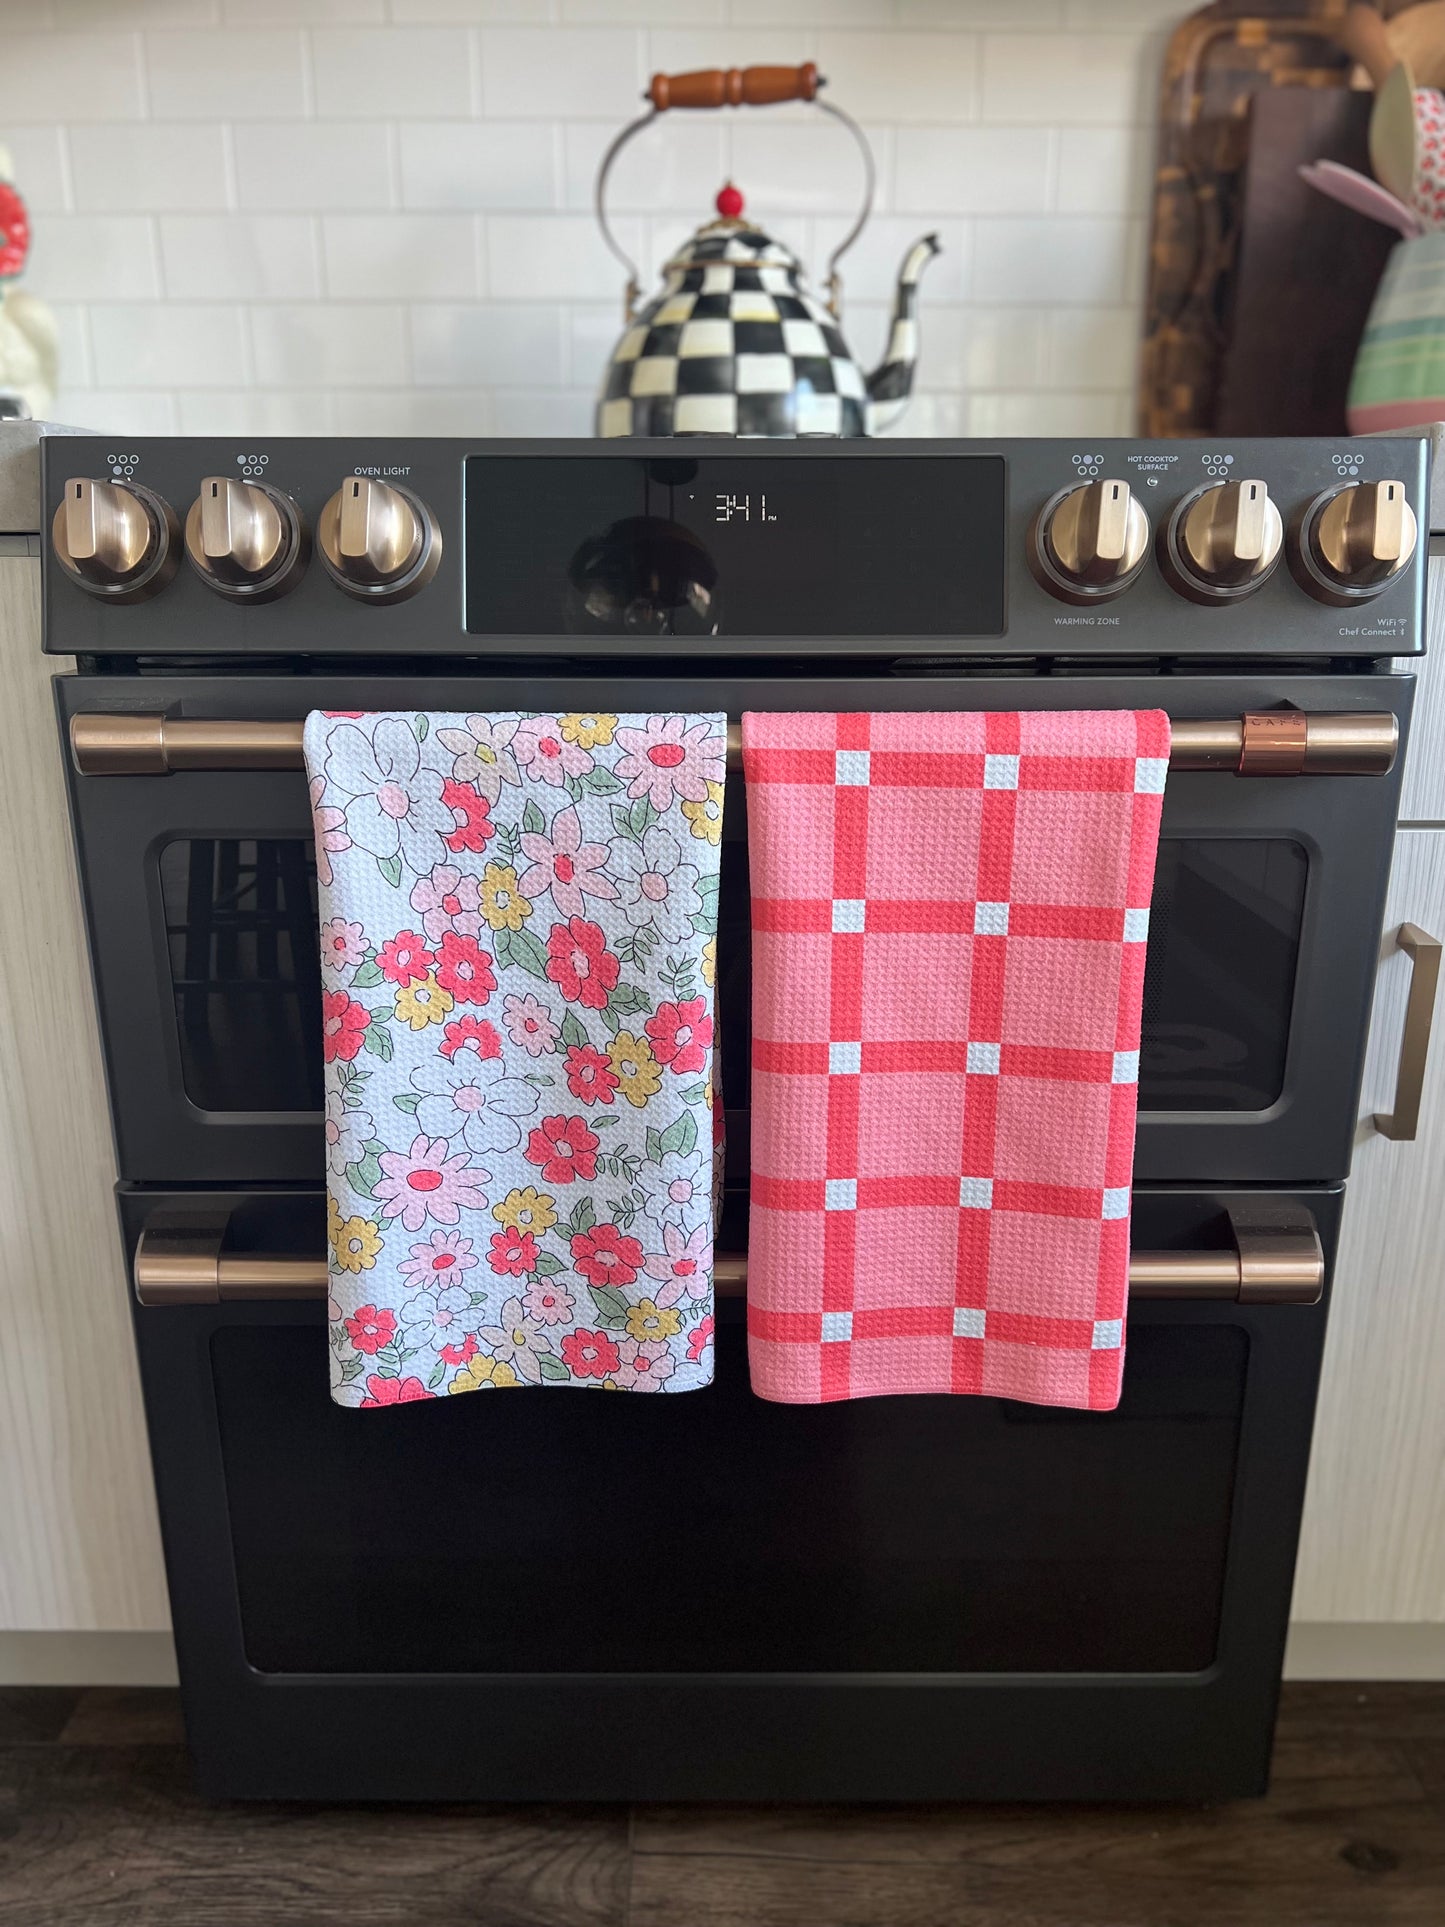 Ring around the Posies: Single-Sided Hand Towel